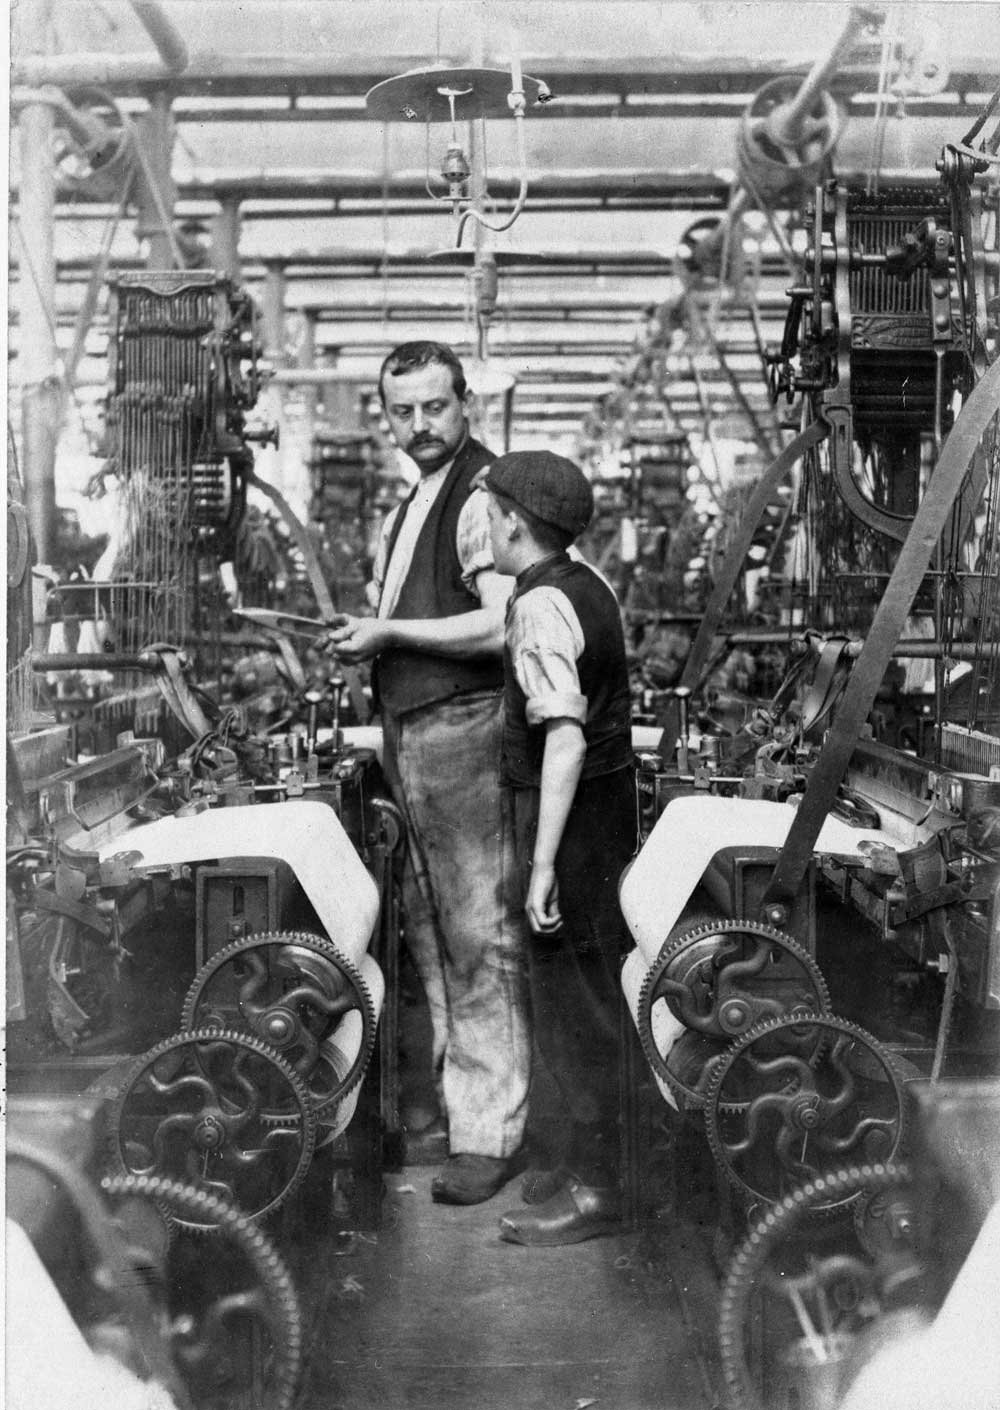 A man in a waistcoat looks down at a boy wearing a flat cap in the aisle between mill equipment.